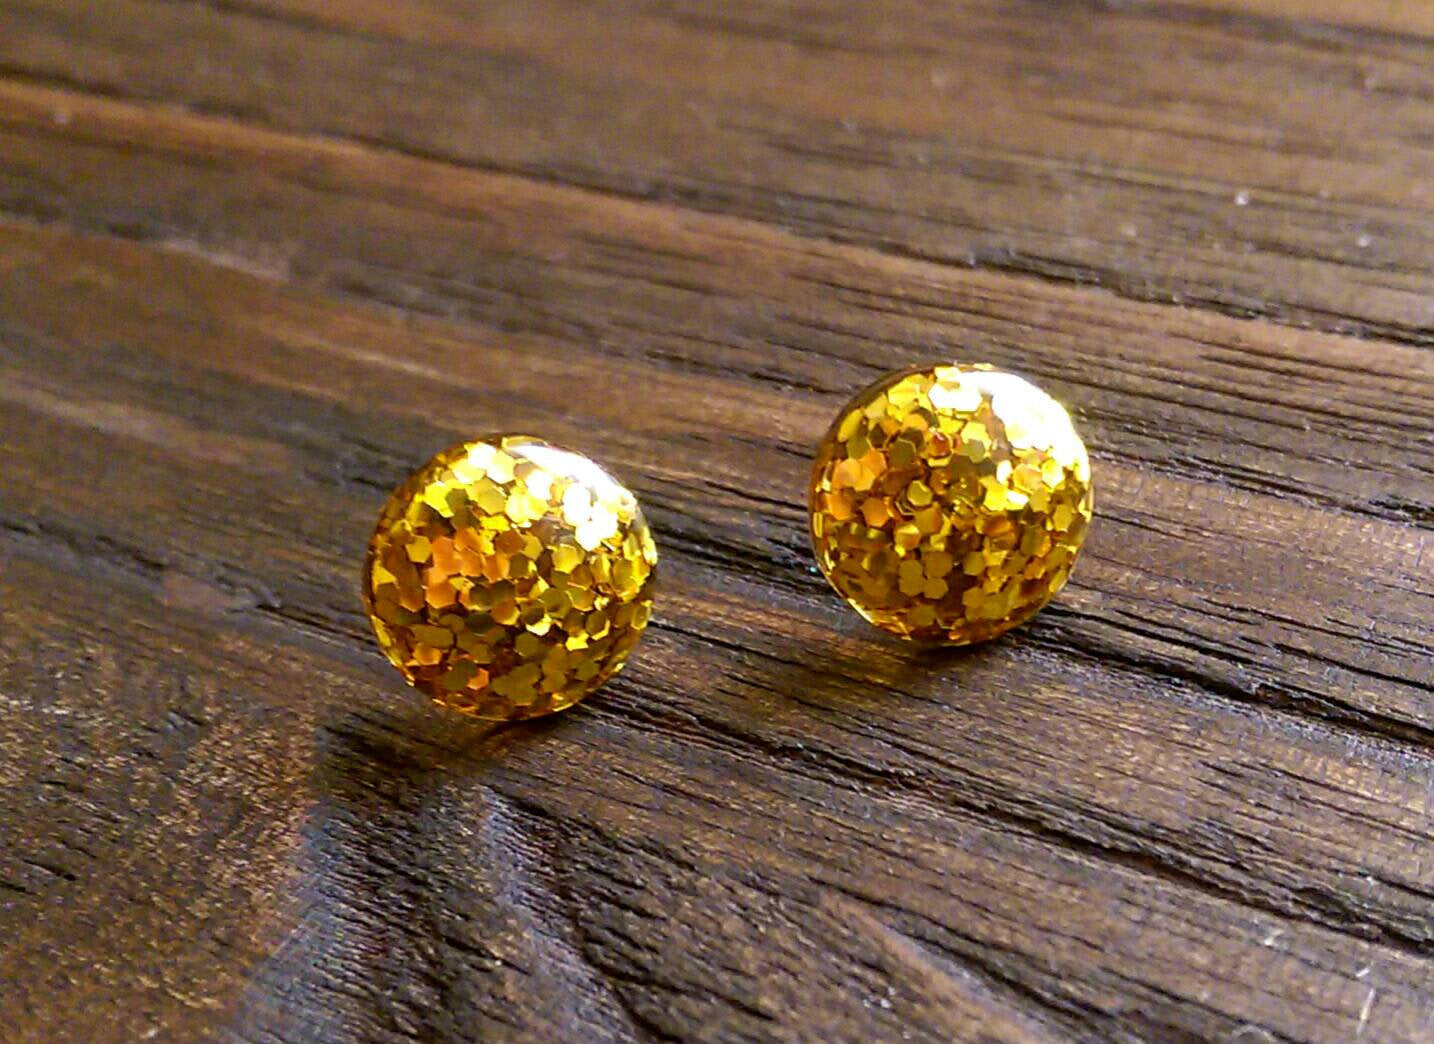 Gold Glitter Circle Resin Stud Earrings, Gold Glitter Earrings, Stainless Steel Stud Earrings. 12mm - Silver and Resin Designs